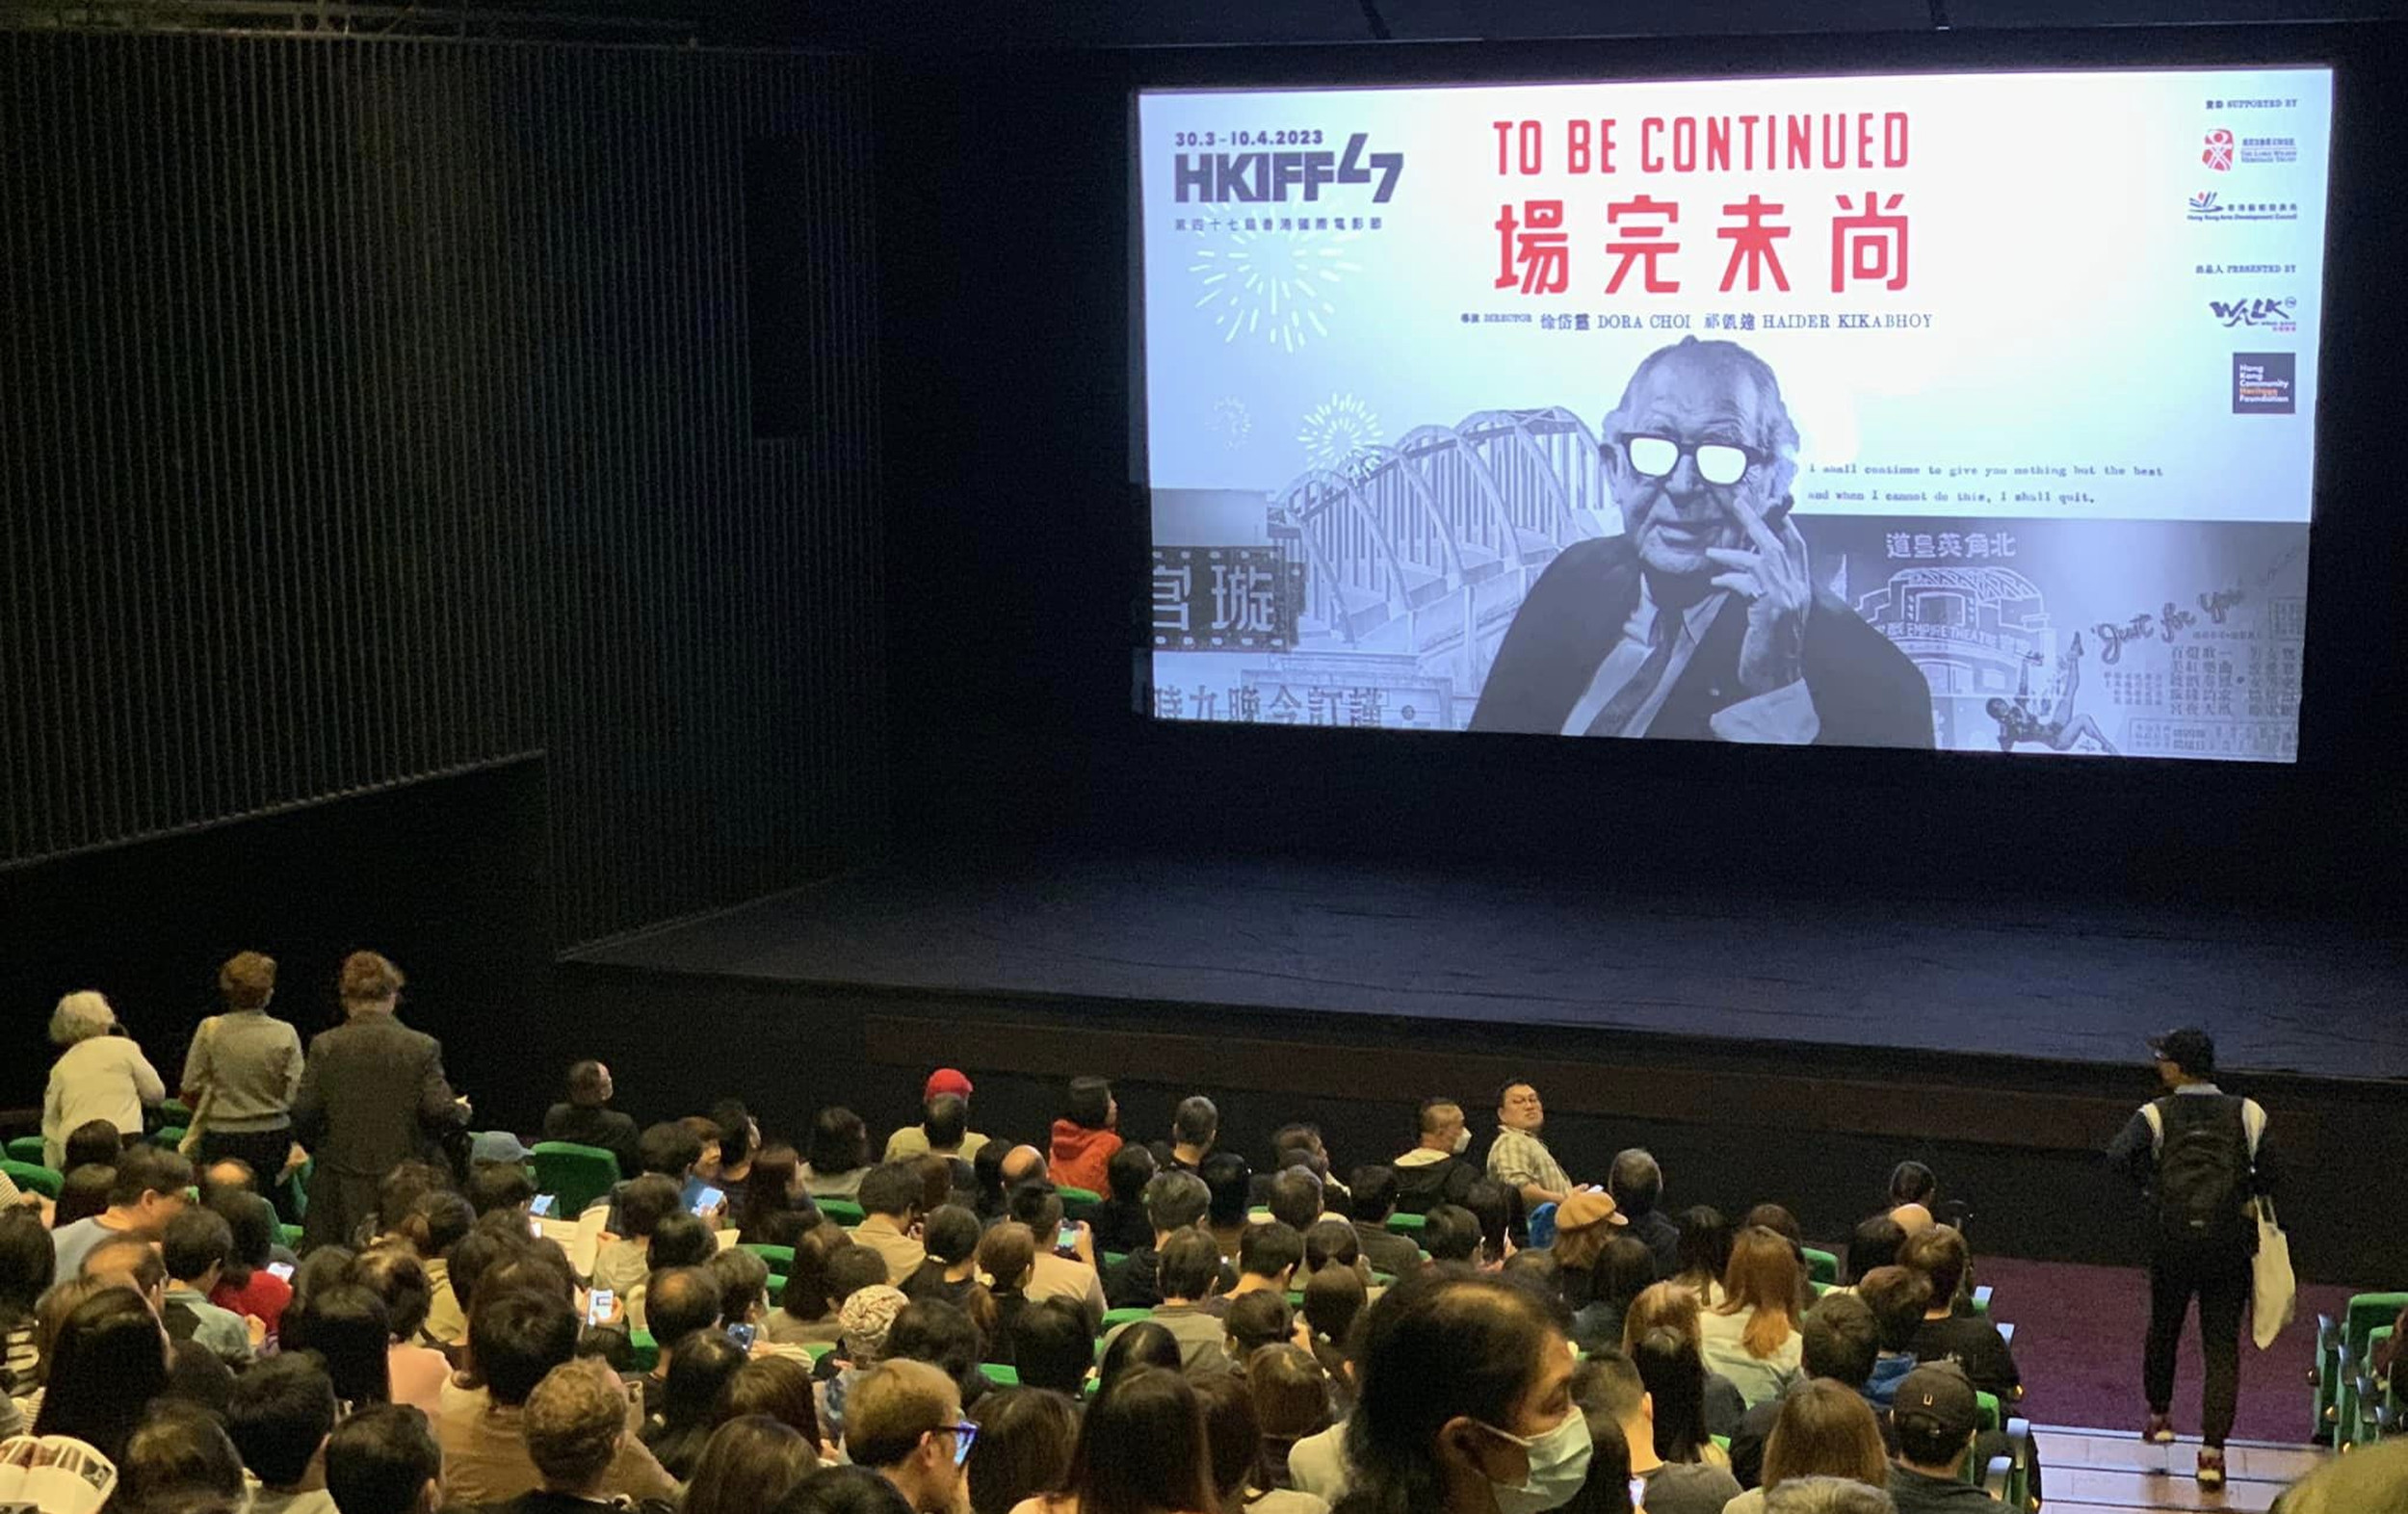 A private screening of a documentary about an entertainment mogul booked for June 4, the anniversary of the Tiananmen Square crackdown has been cancelled. Photo: FACEBOOK/To Be Continued